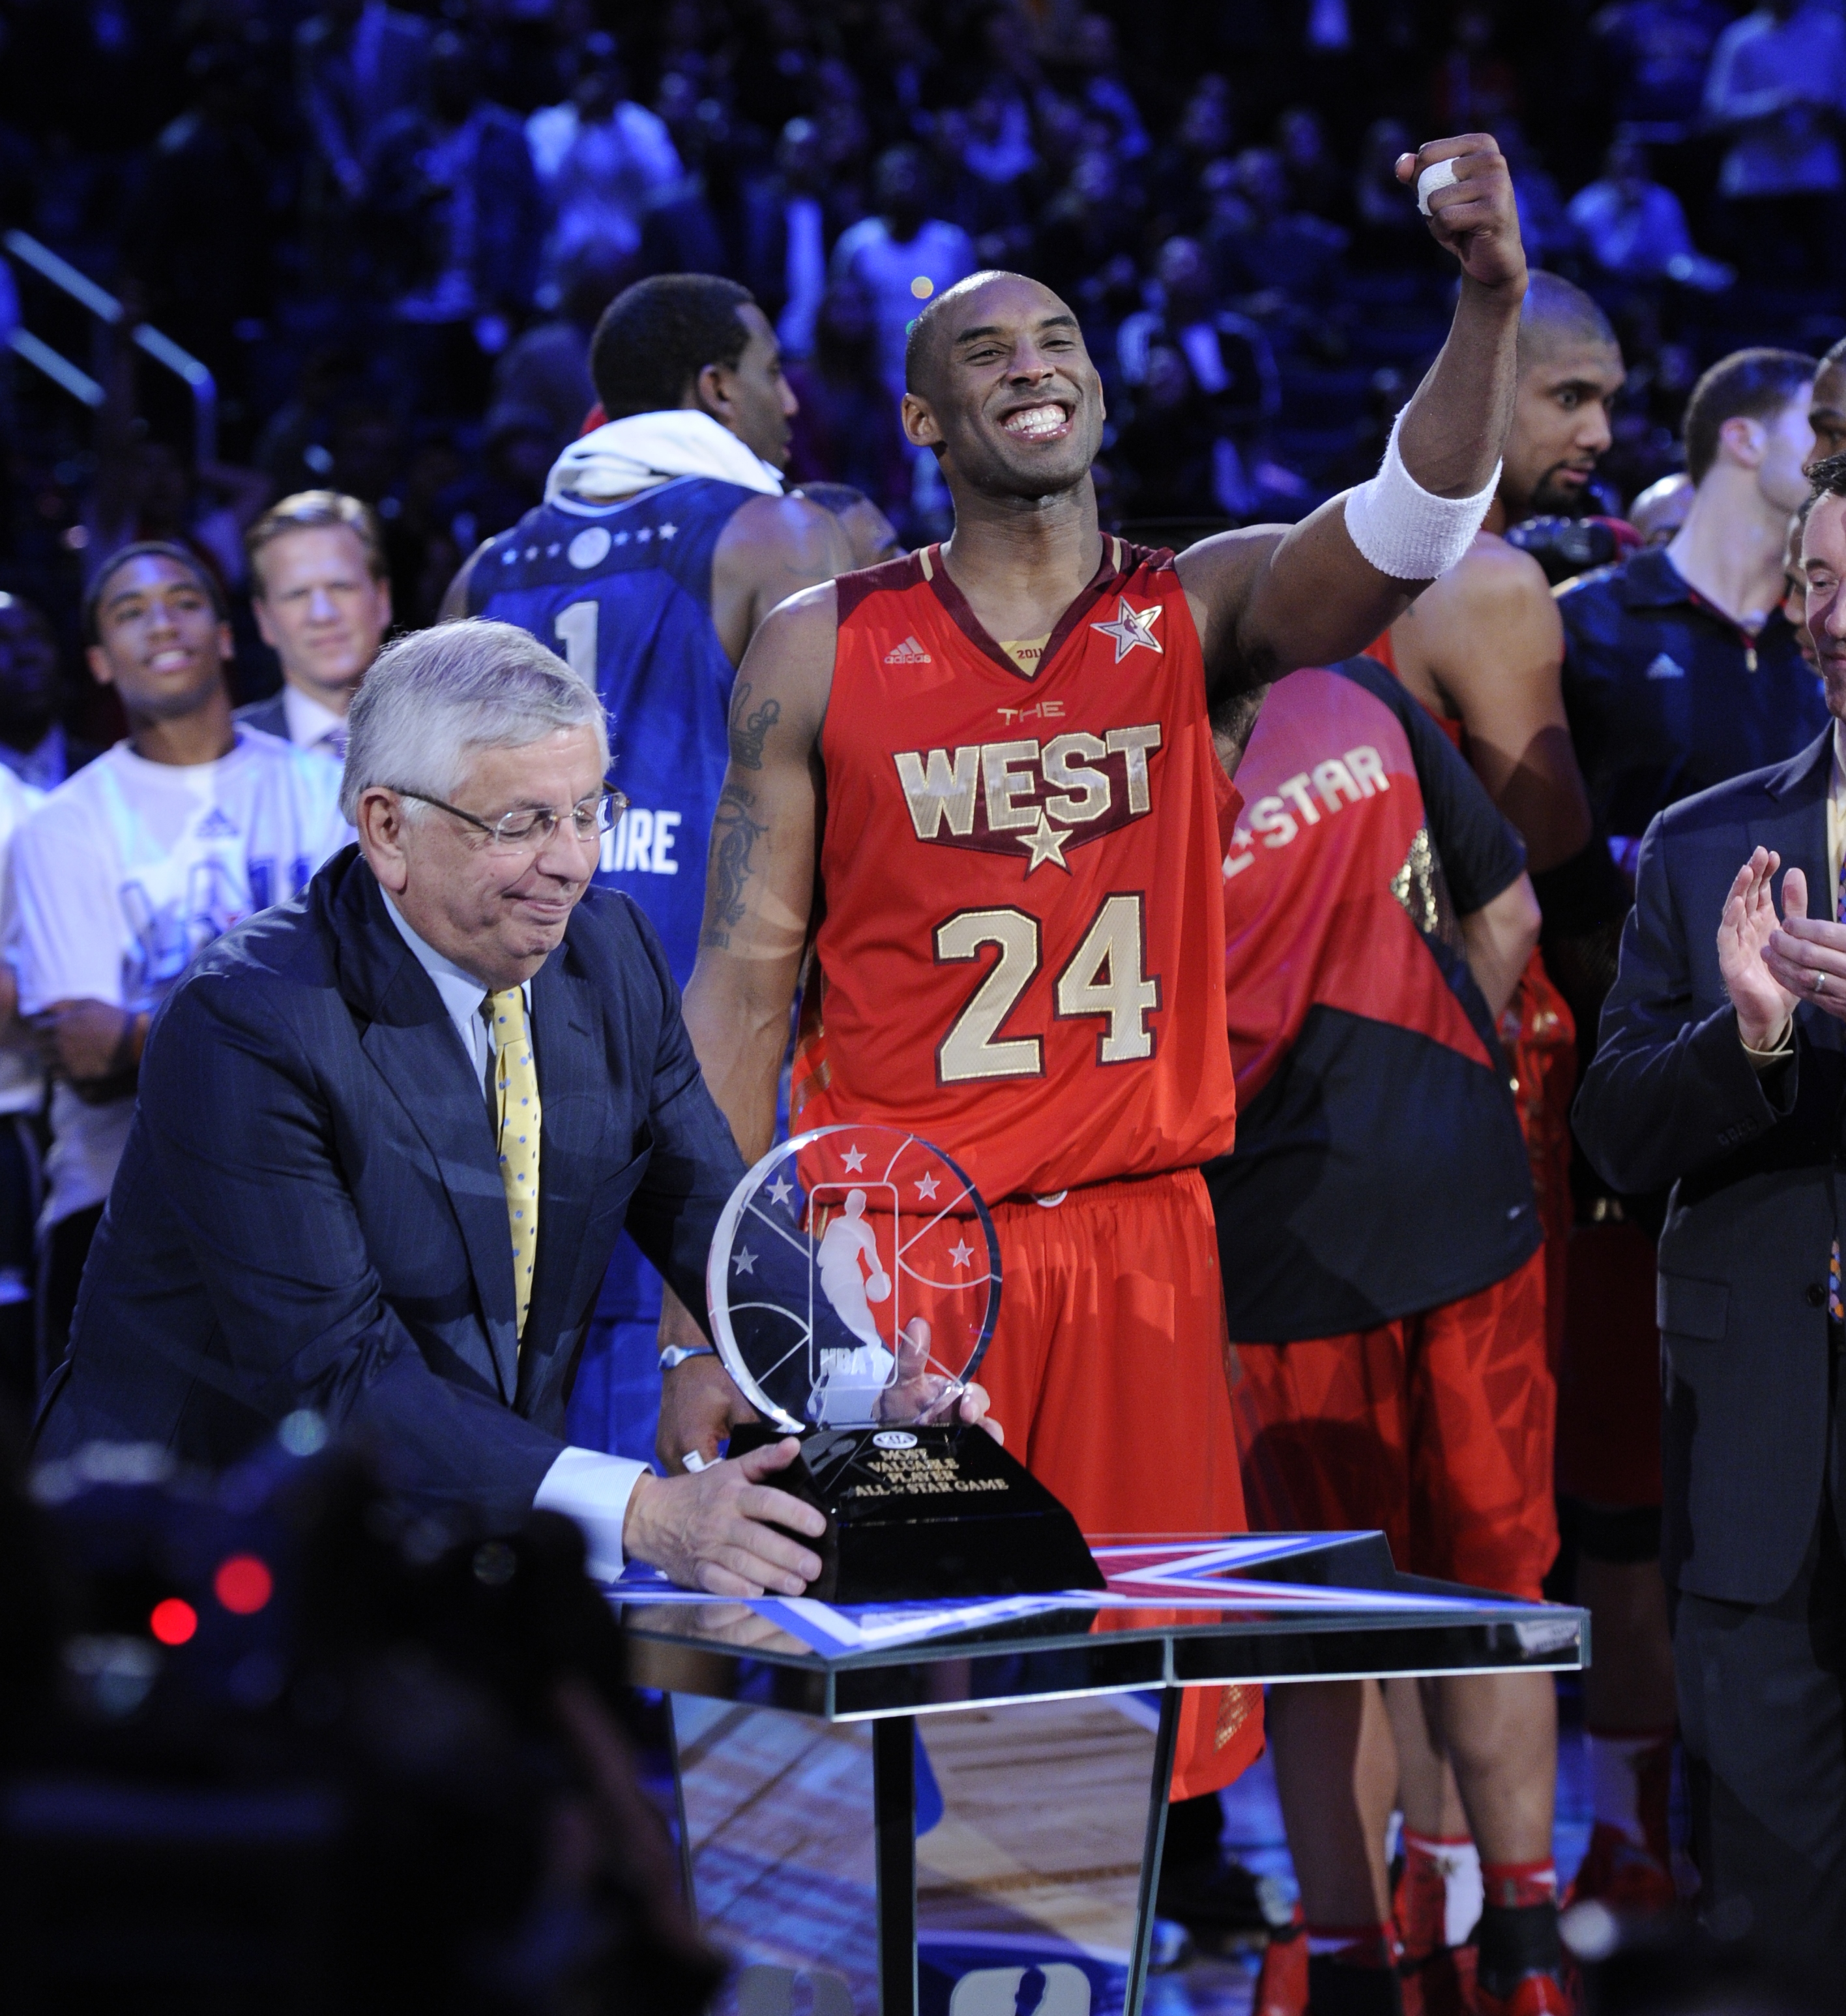 ORG XMIT: RH 39583 NBA All Star 2/19/2011  2/20/11 9:34:48 -- Los Angeles, CA, U.S.A  -- Kobe Bryant celebrates being awarded the MVP trophy by NBA commissioner David Stern  during the 2011 NBA All Star Game at Staples Center in Los Angeles, CA --    Photo by Robert Hanashiro, USA TODAY Staff  (Via OlyDrop)